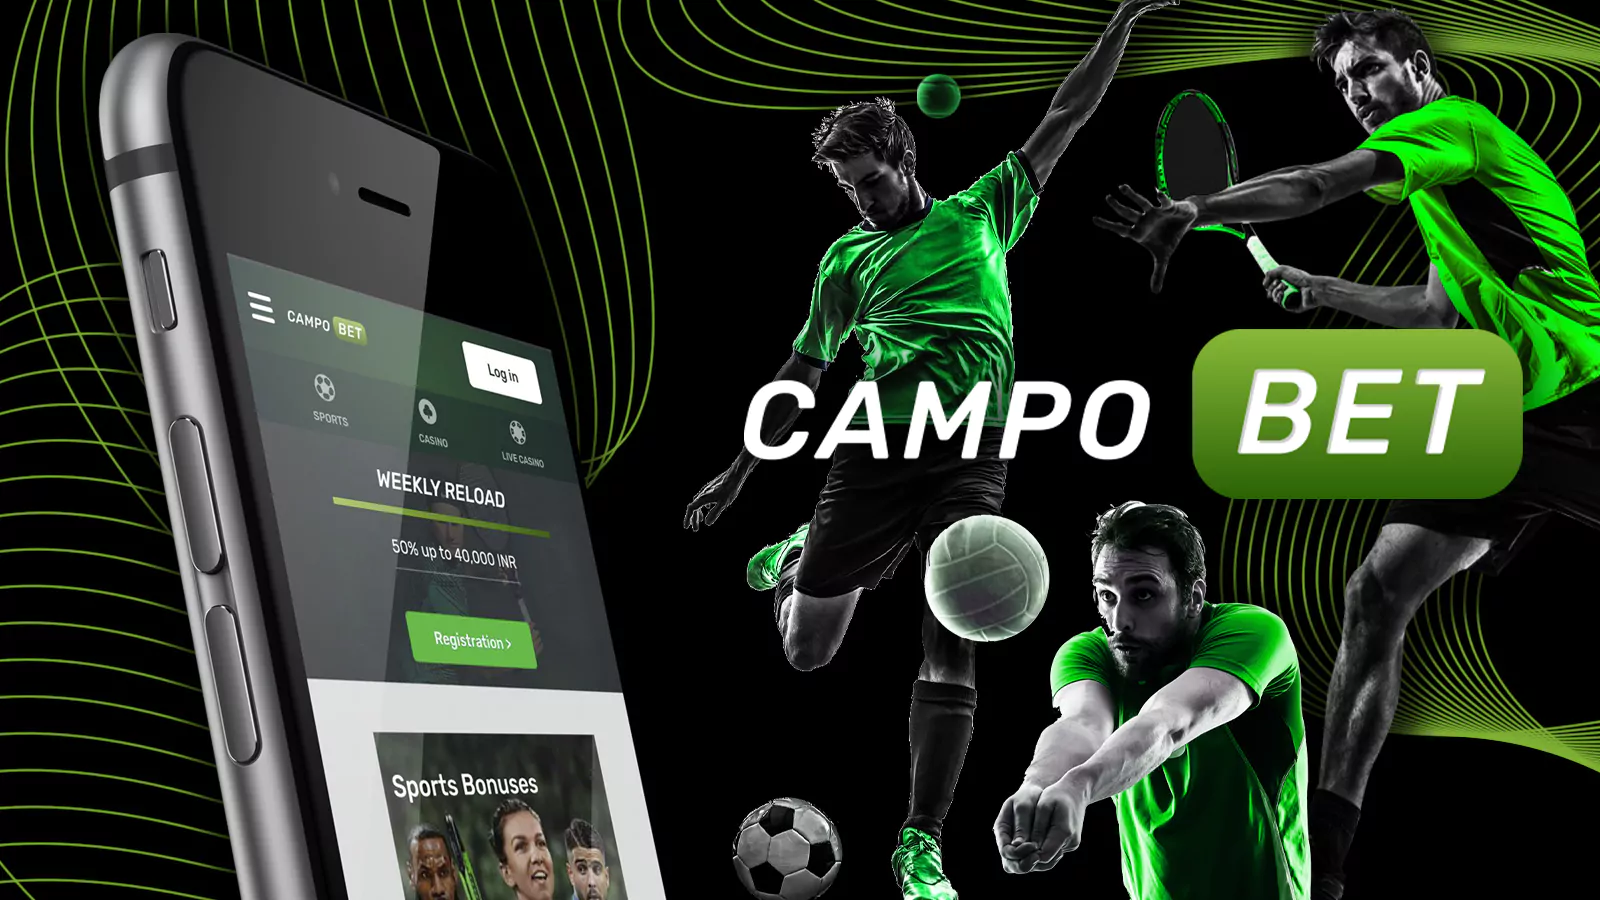 Get +100% up to INR 30,000 for betting on cricket or any other sport with Camobet App.